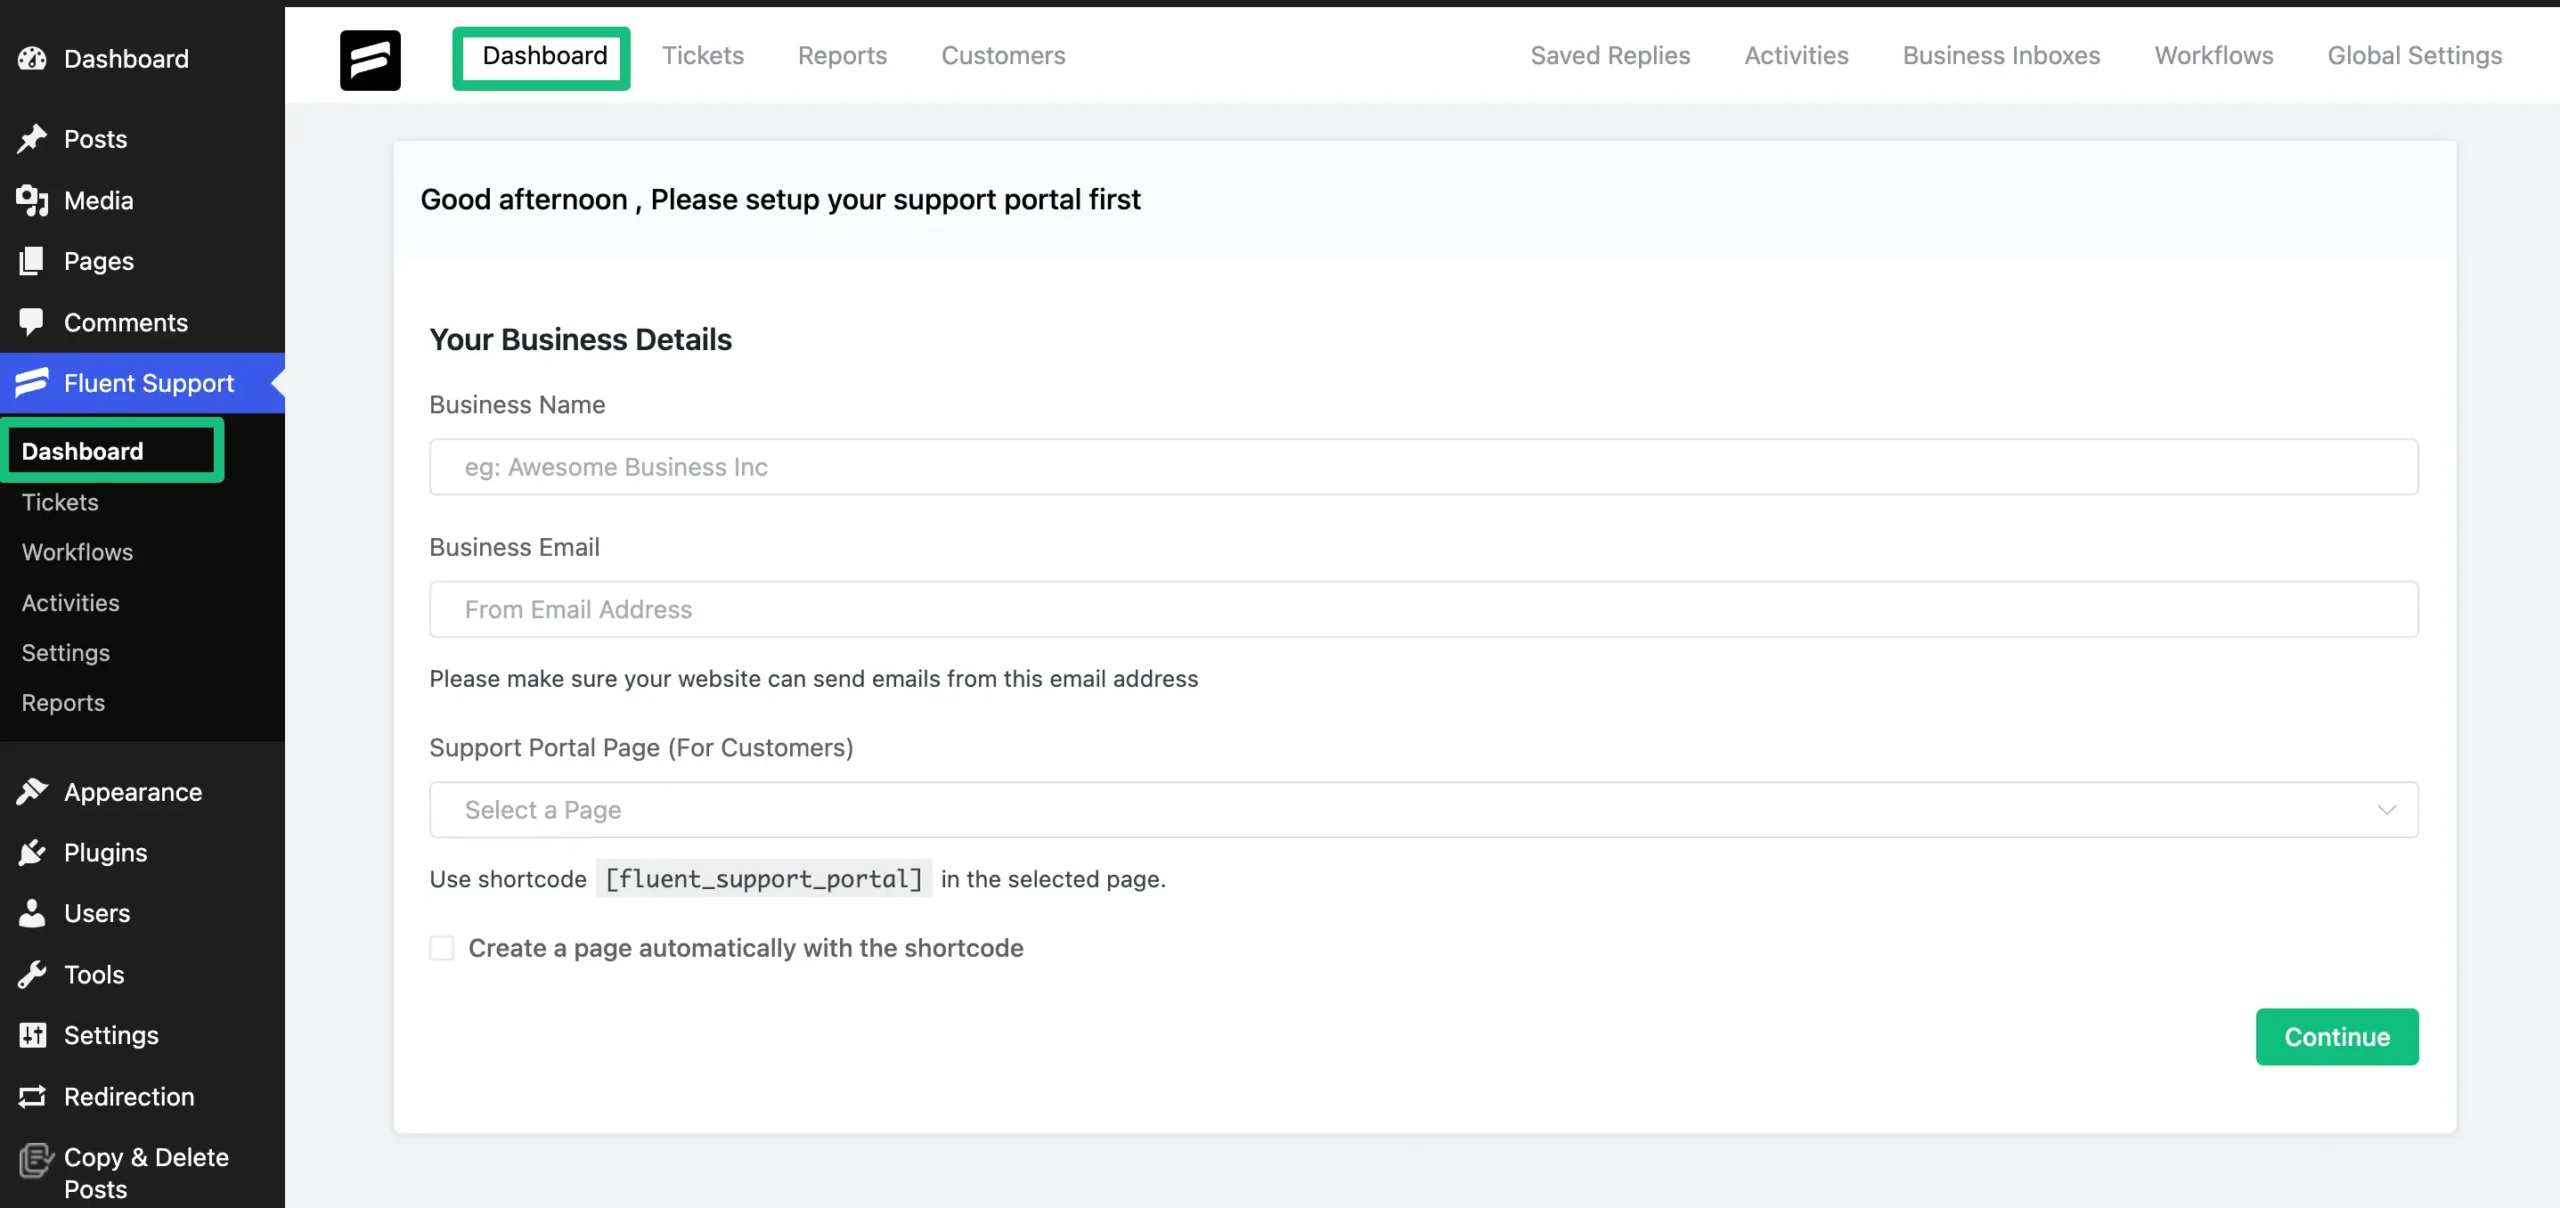 Initial overview of Fluent Support Dashboard